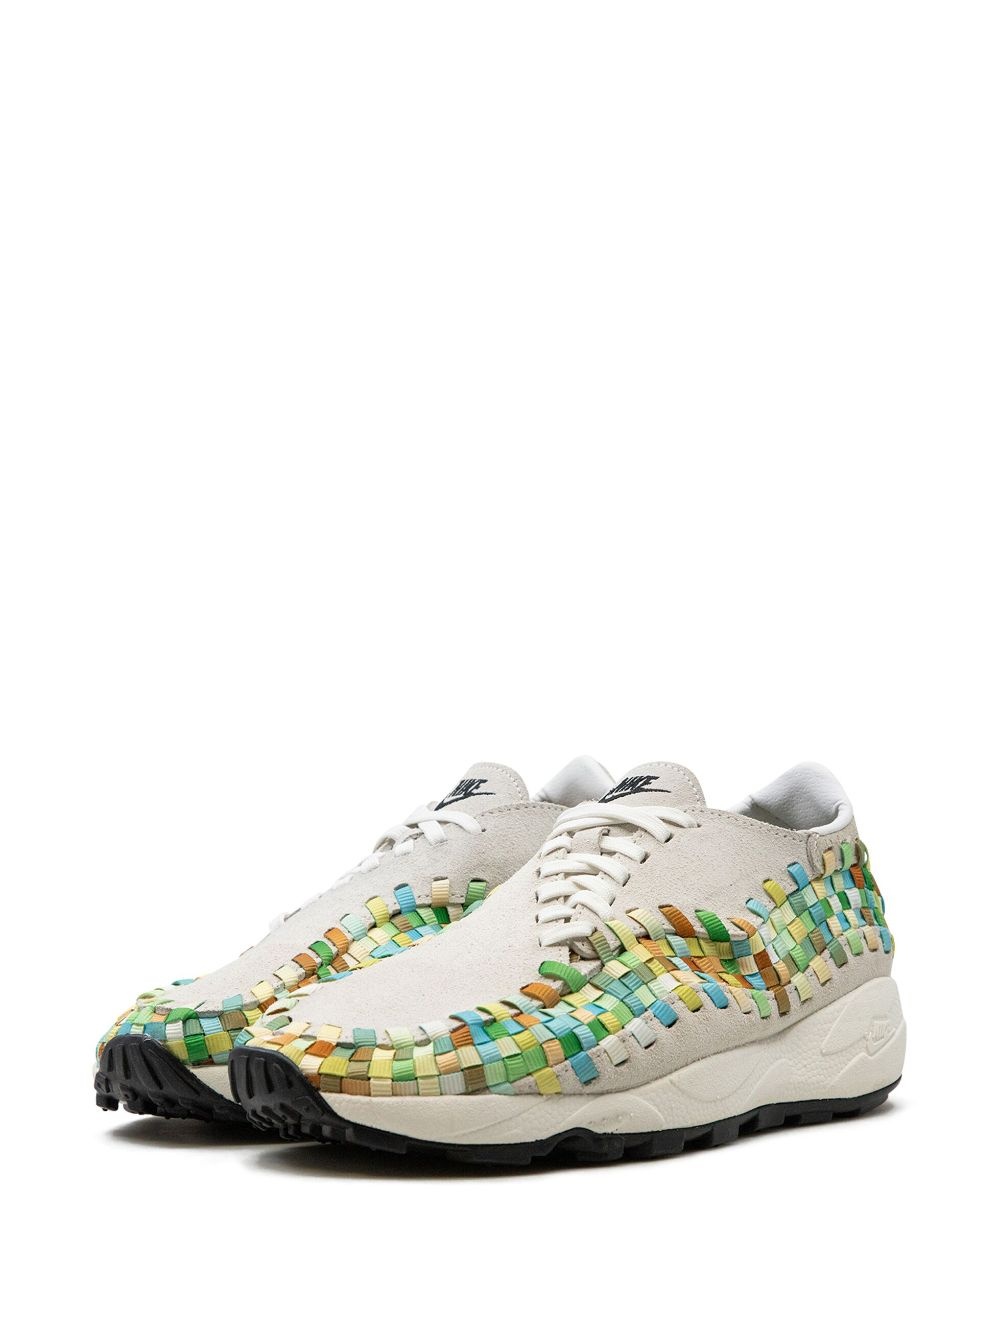 Air Footscape Woven "Rainbow" sneakers - 4